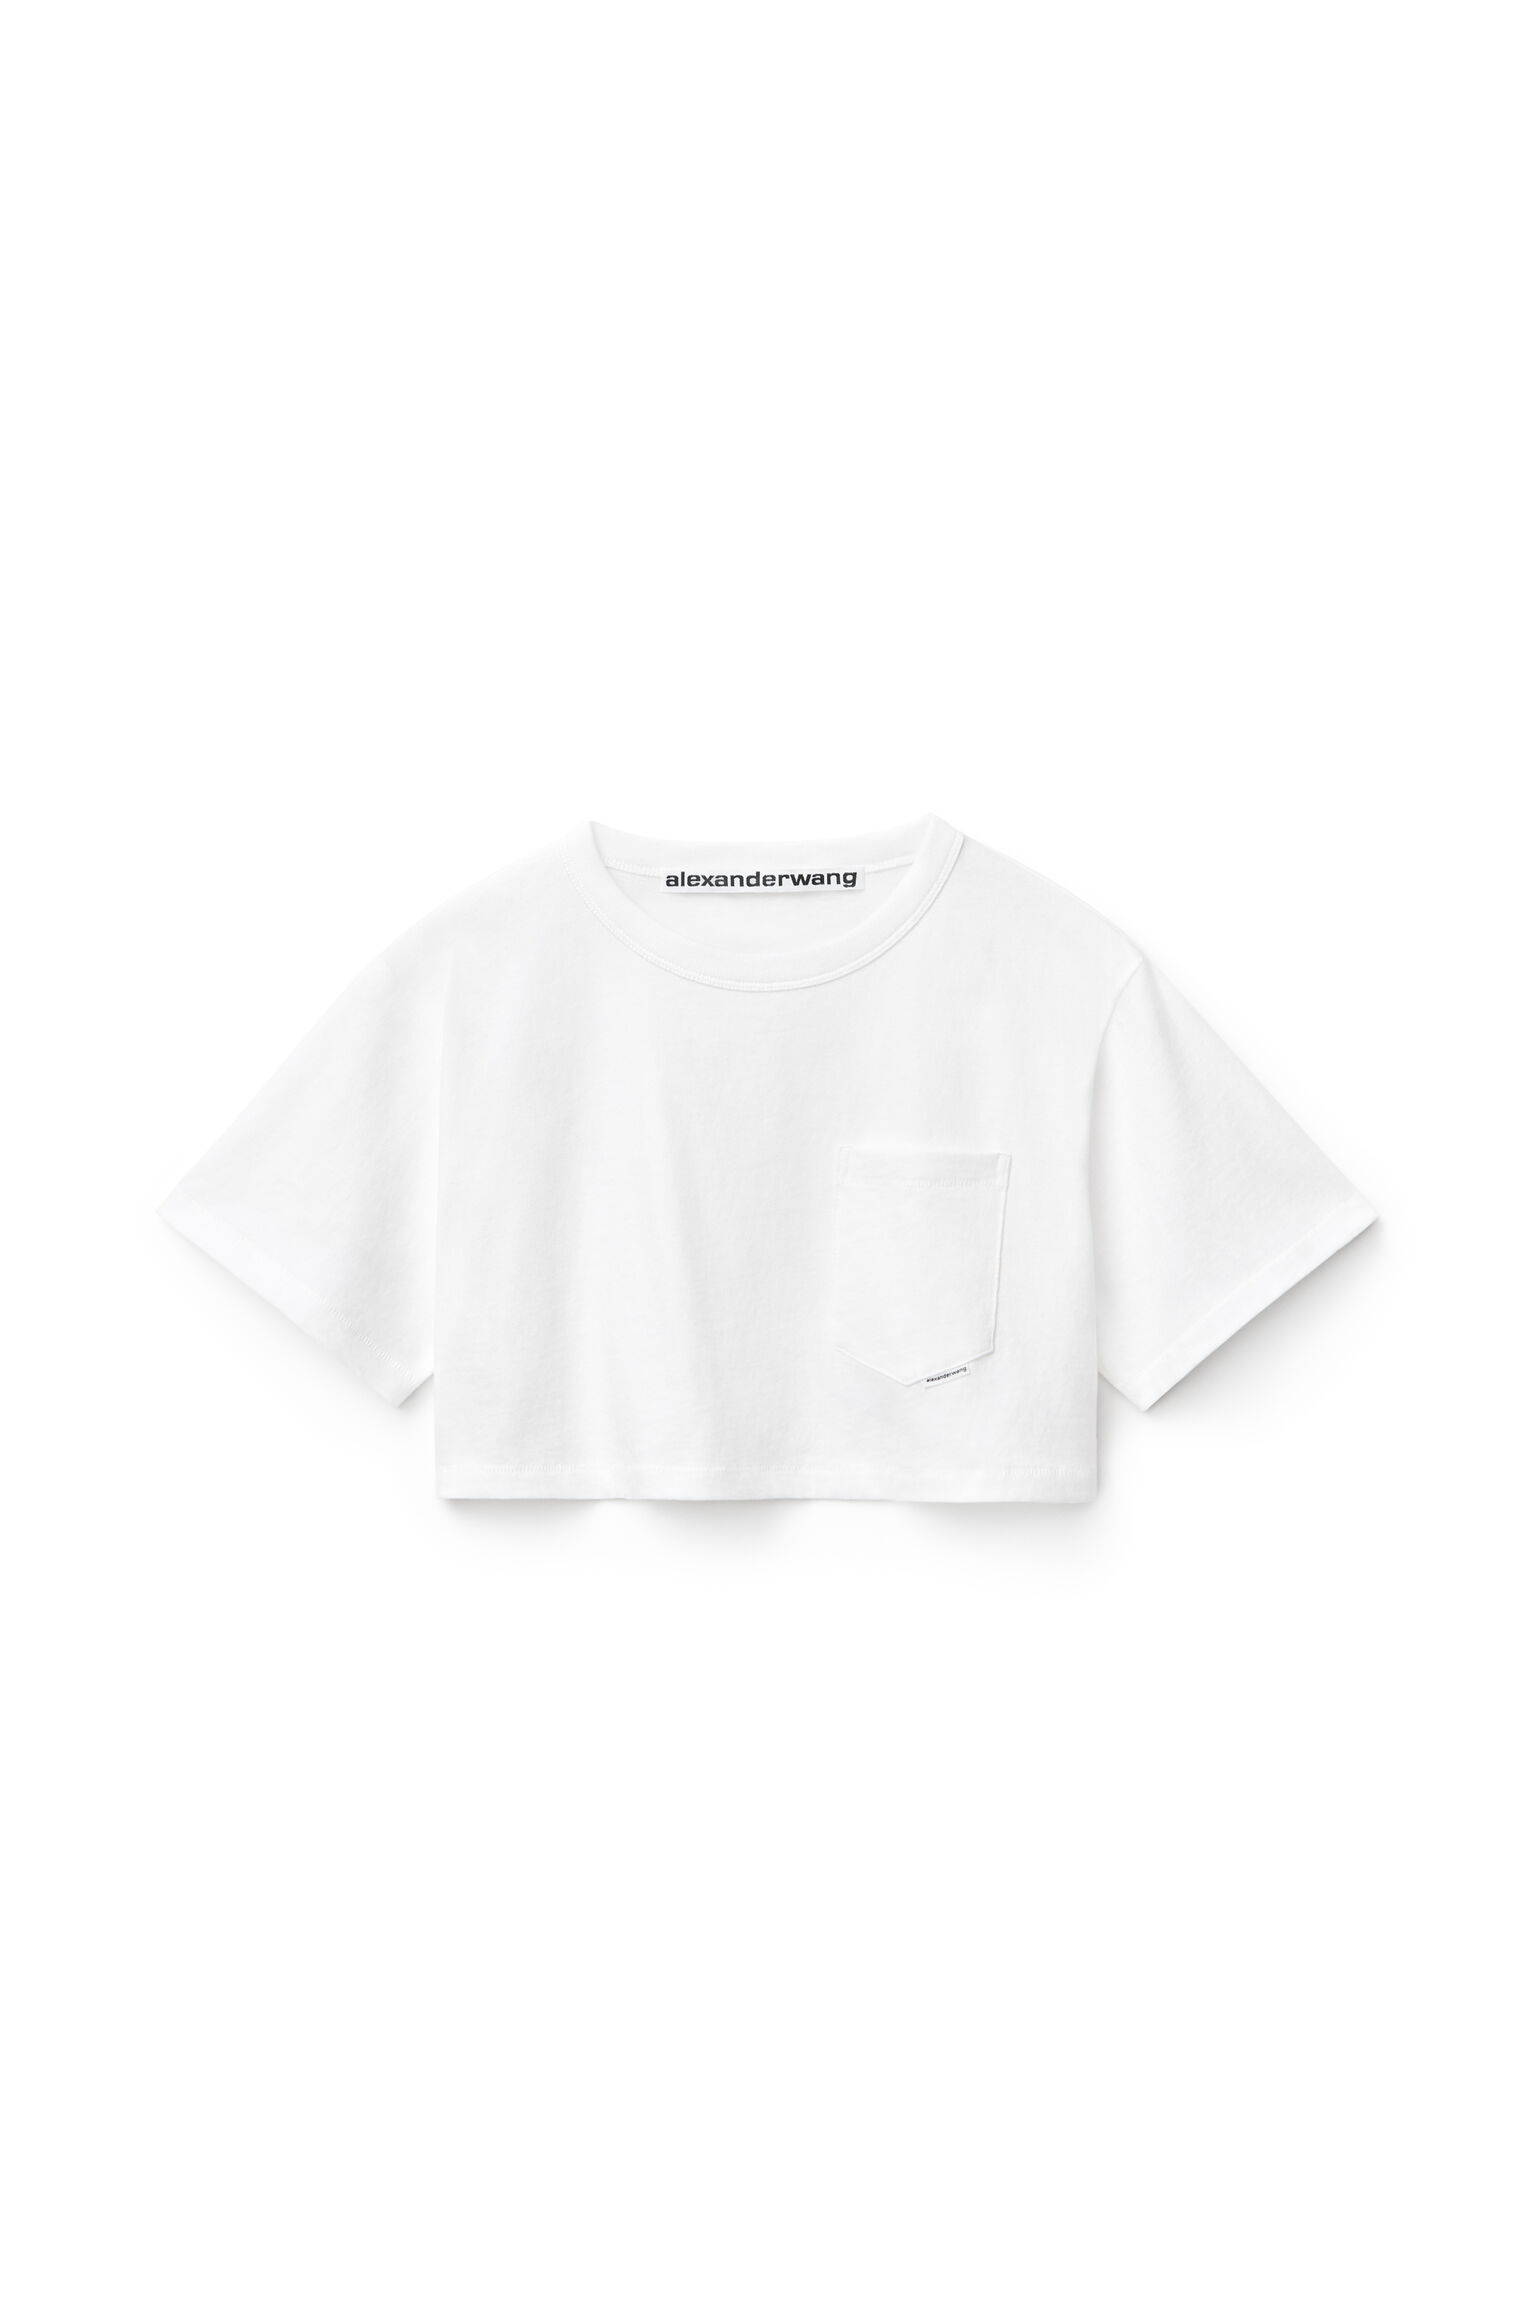 Alexander Wang Chain Strap Crop Top in White